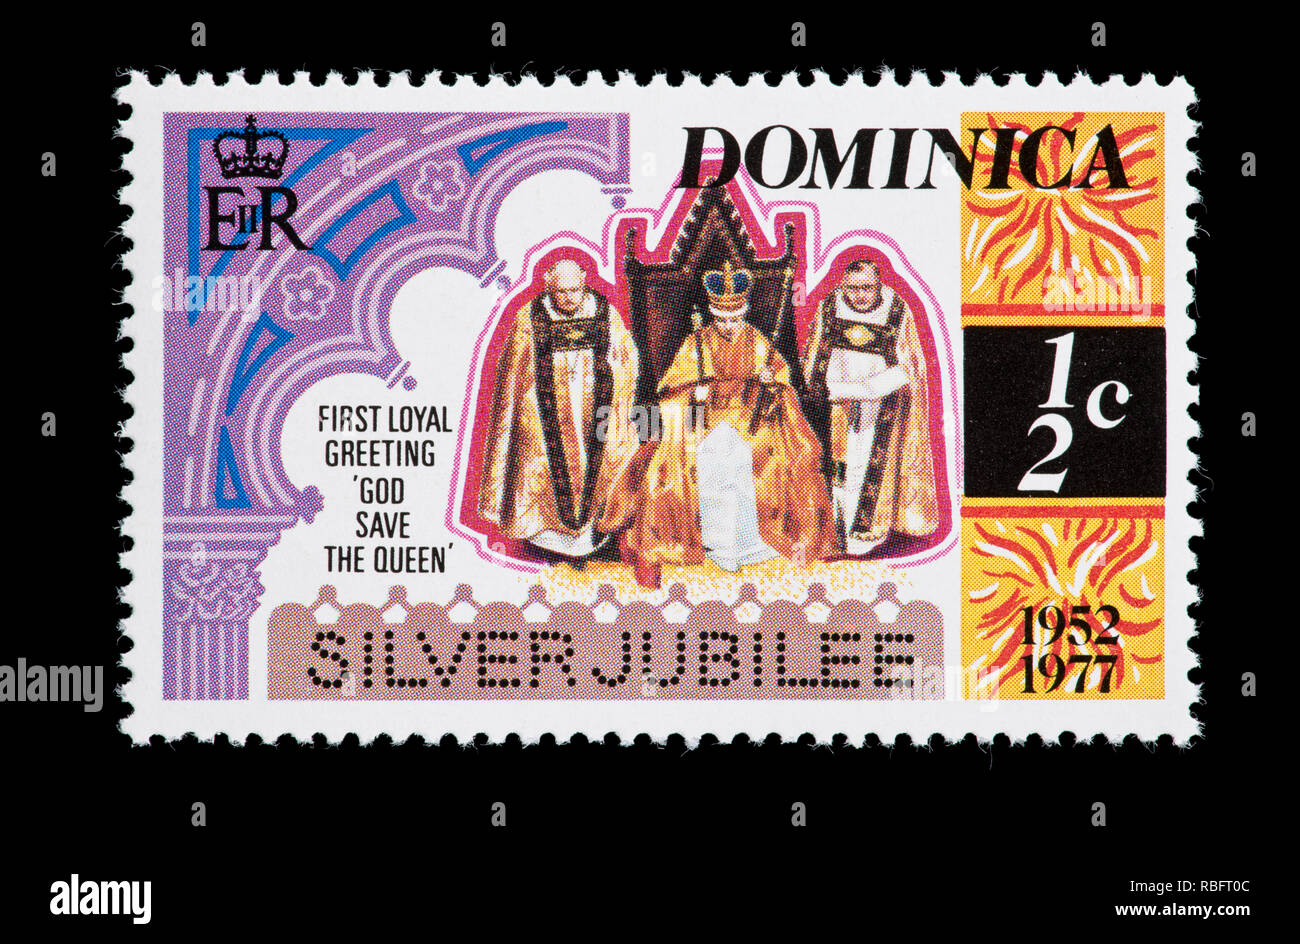 Postage stamp from Dominica depicting the enthronement of Queen Elizabeth II, 25th anniversary. Stock Photo